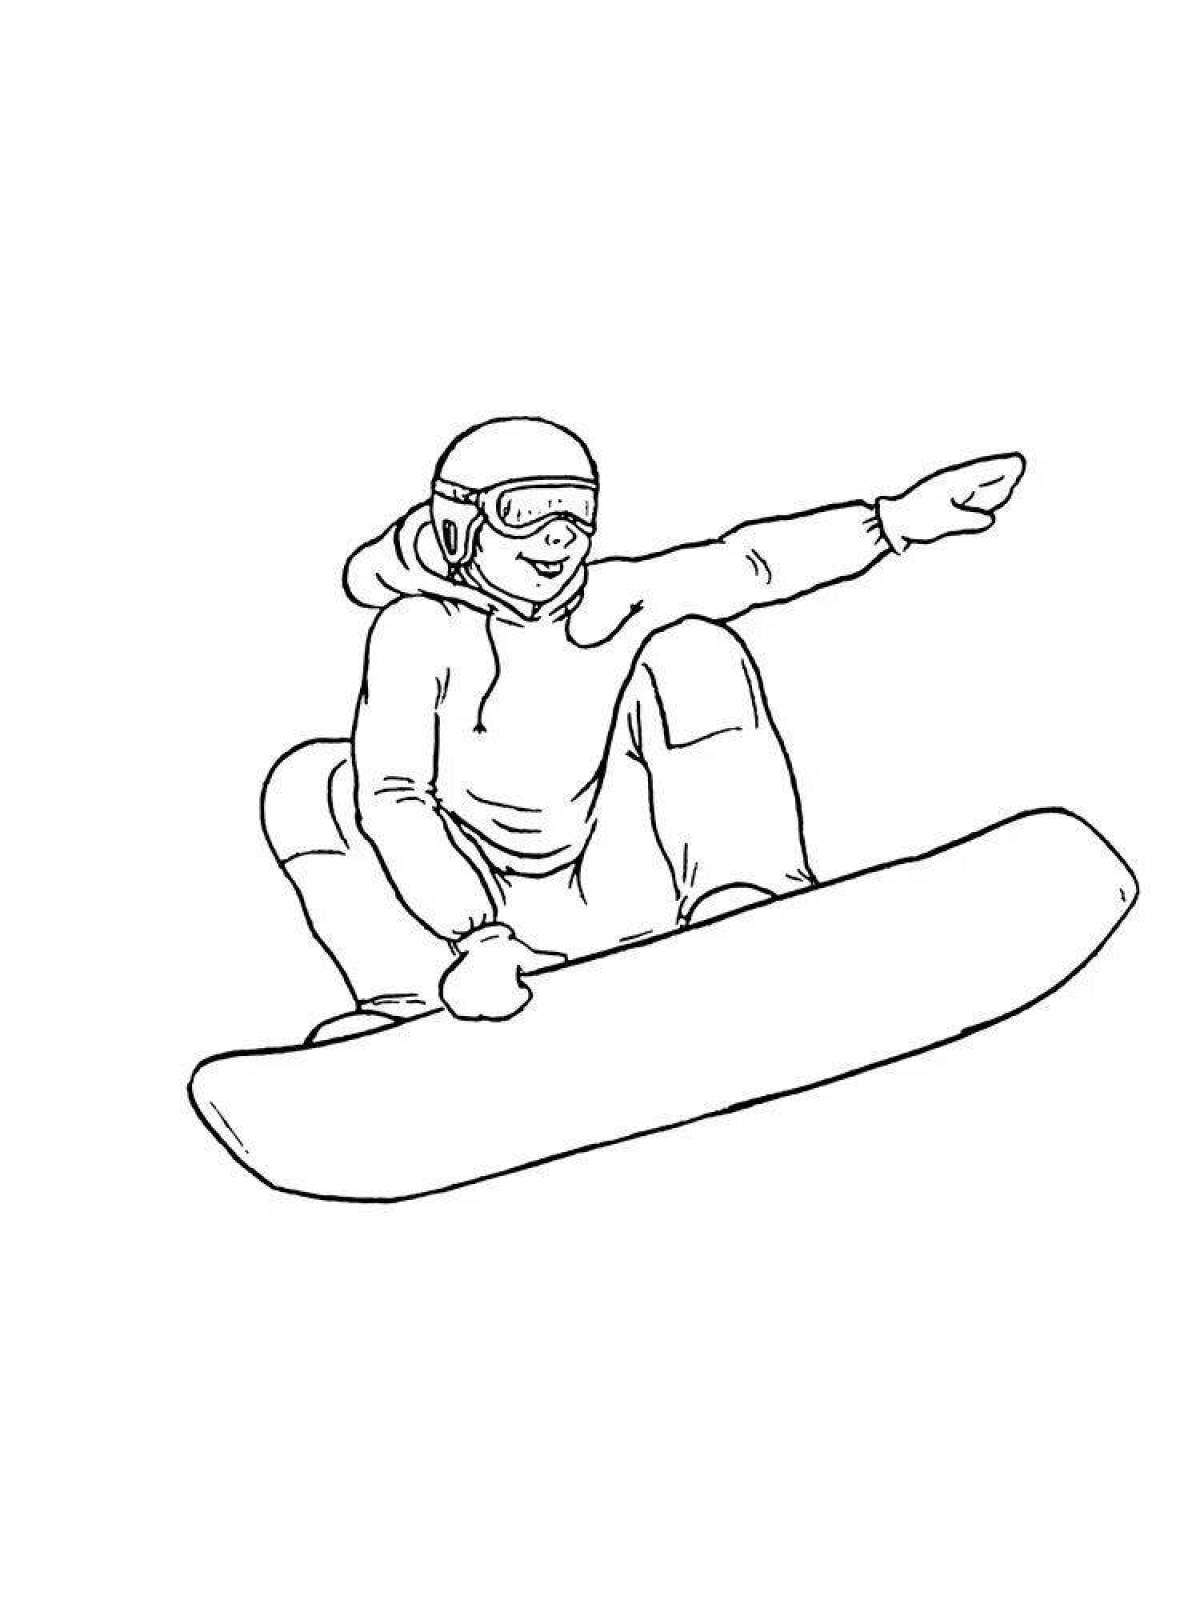 Glowing snowboard coloring page